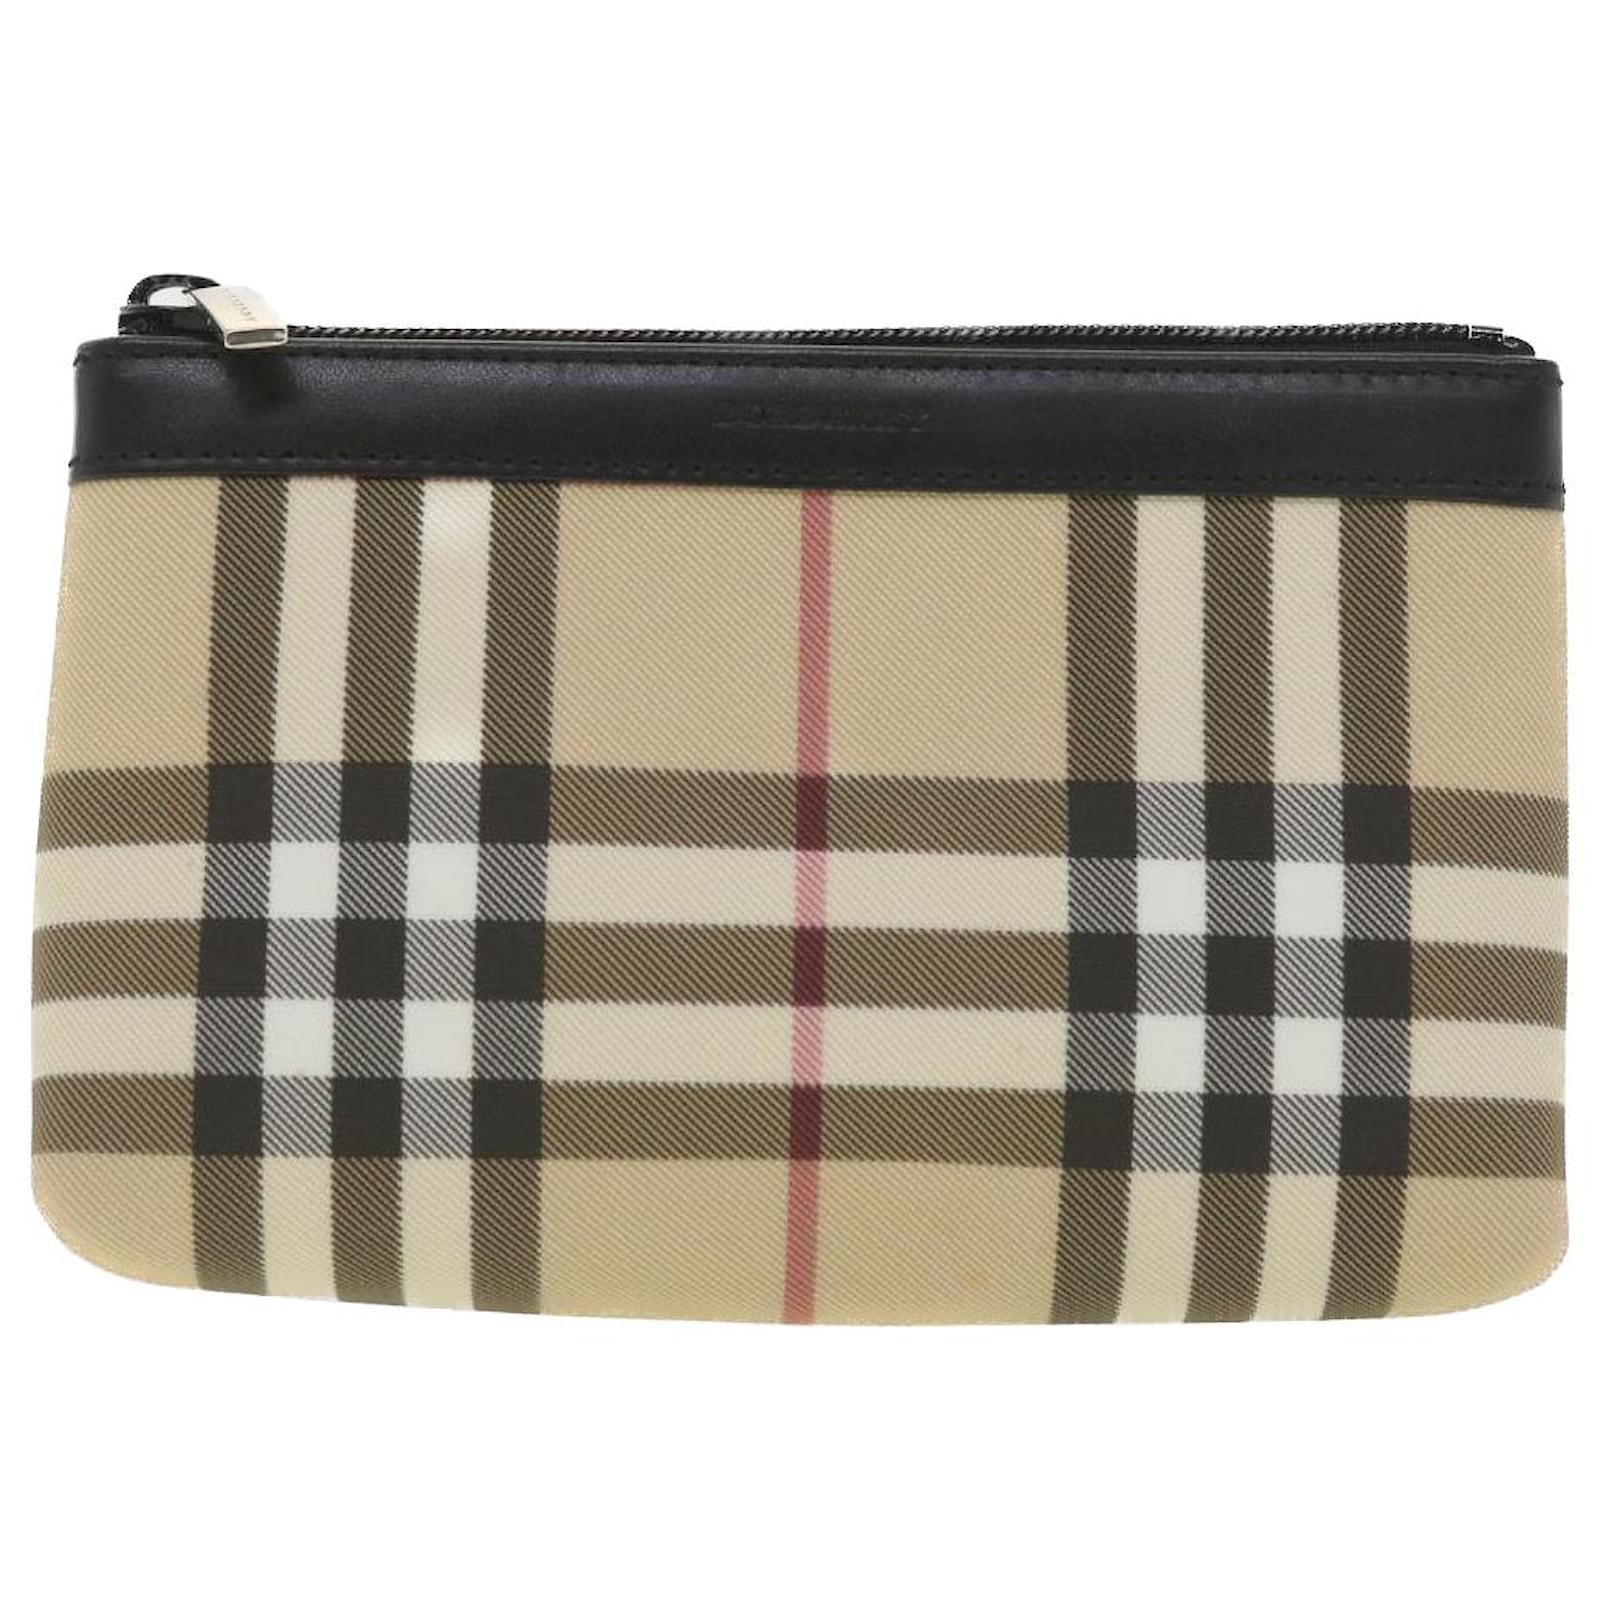 Burberry Metallic/Beige Nova Check PVC and Patent Leather French